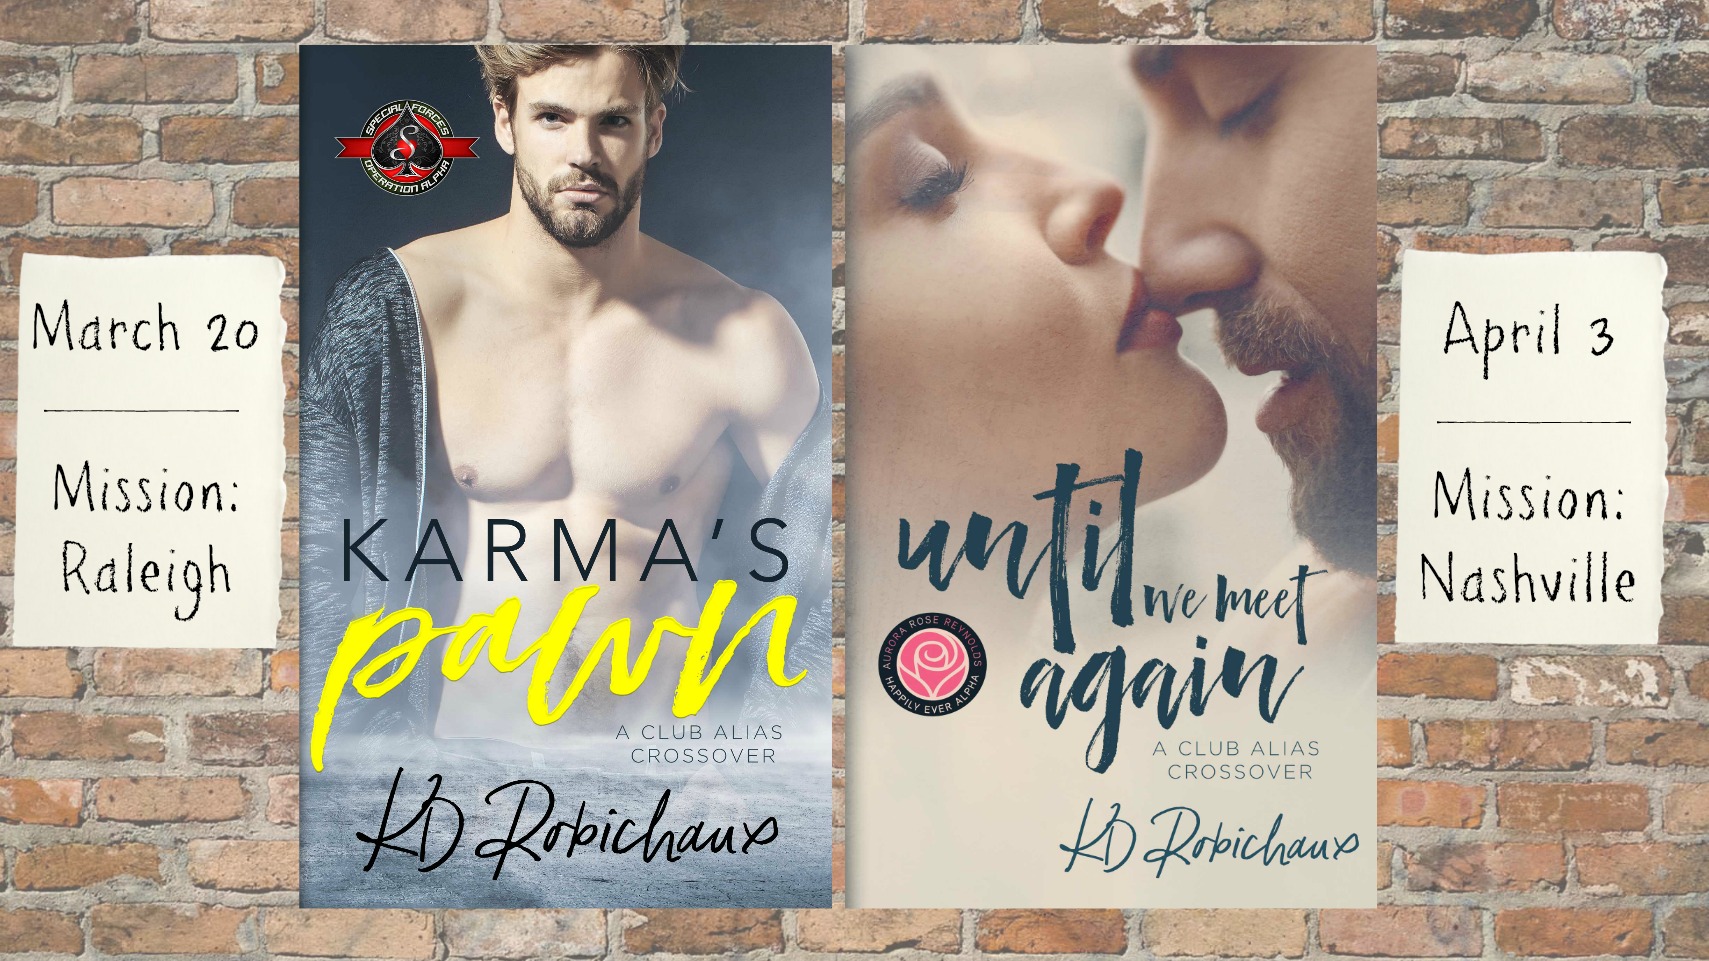 Double Cover Reveal: Karma’s Pawn and Until We Meet Again by KD Robichaux